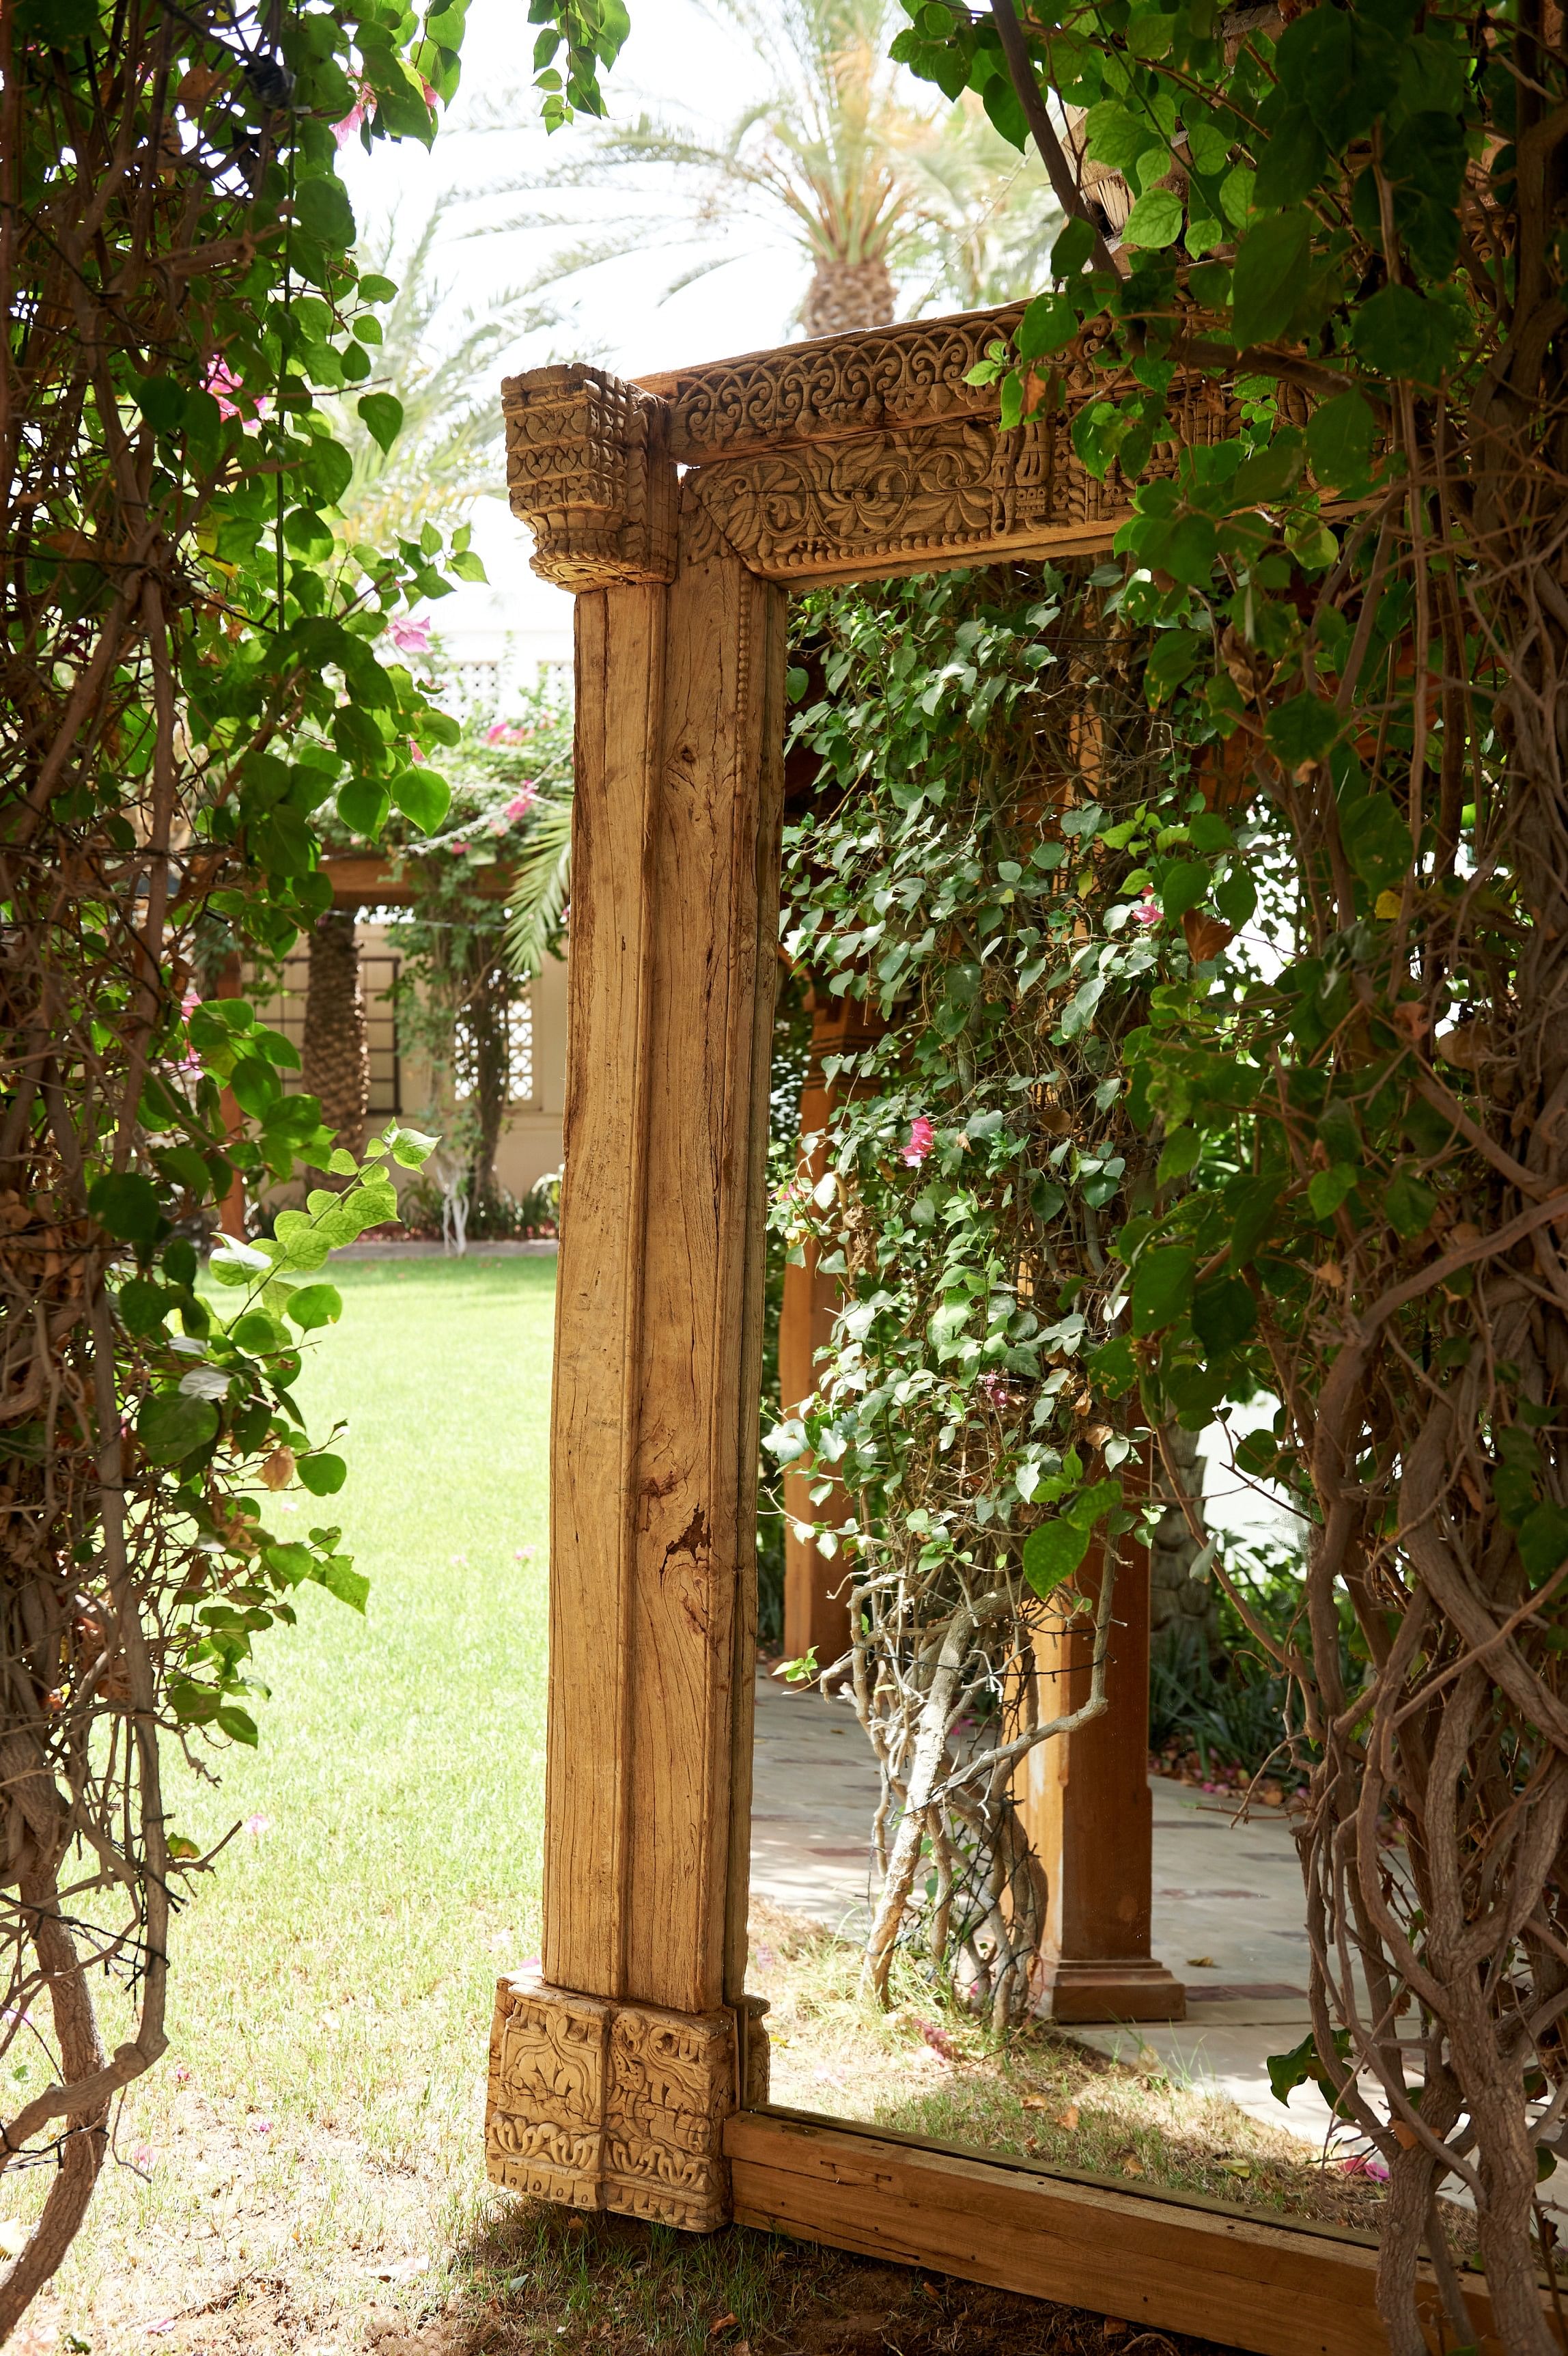 A rugged wooden mirror stands in a doorway reflecting a creeping Bougainvillea plant climbing a wall